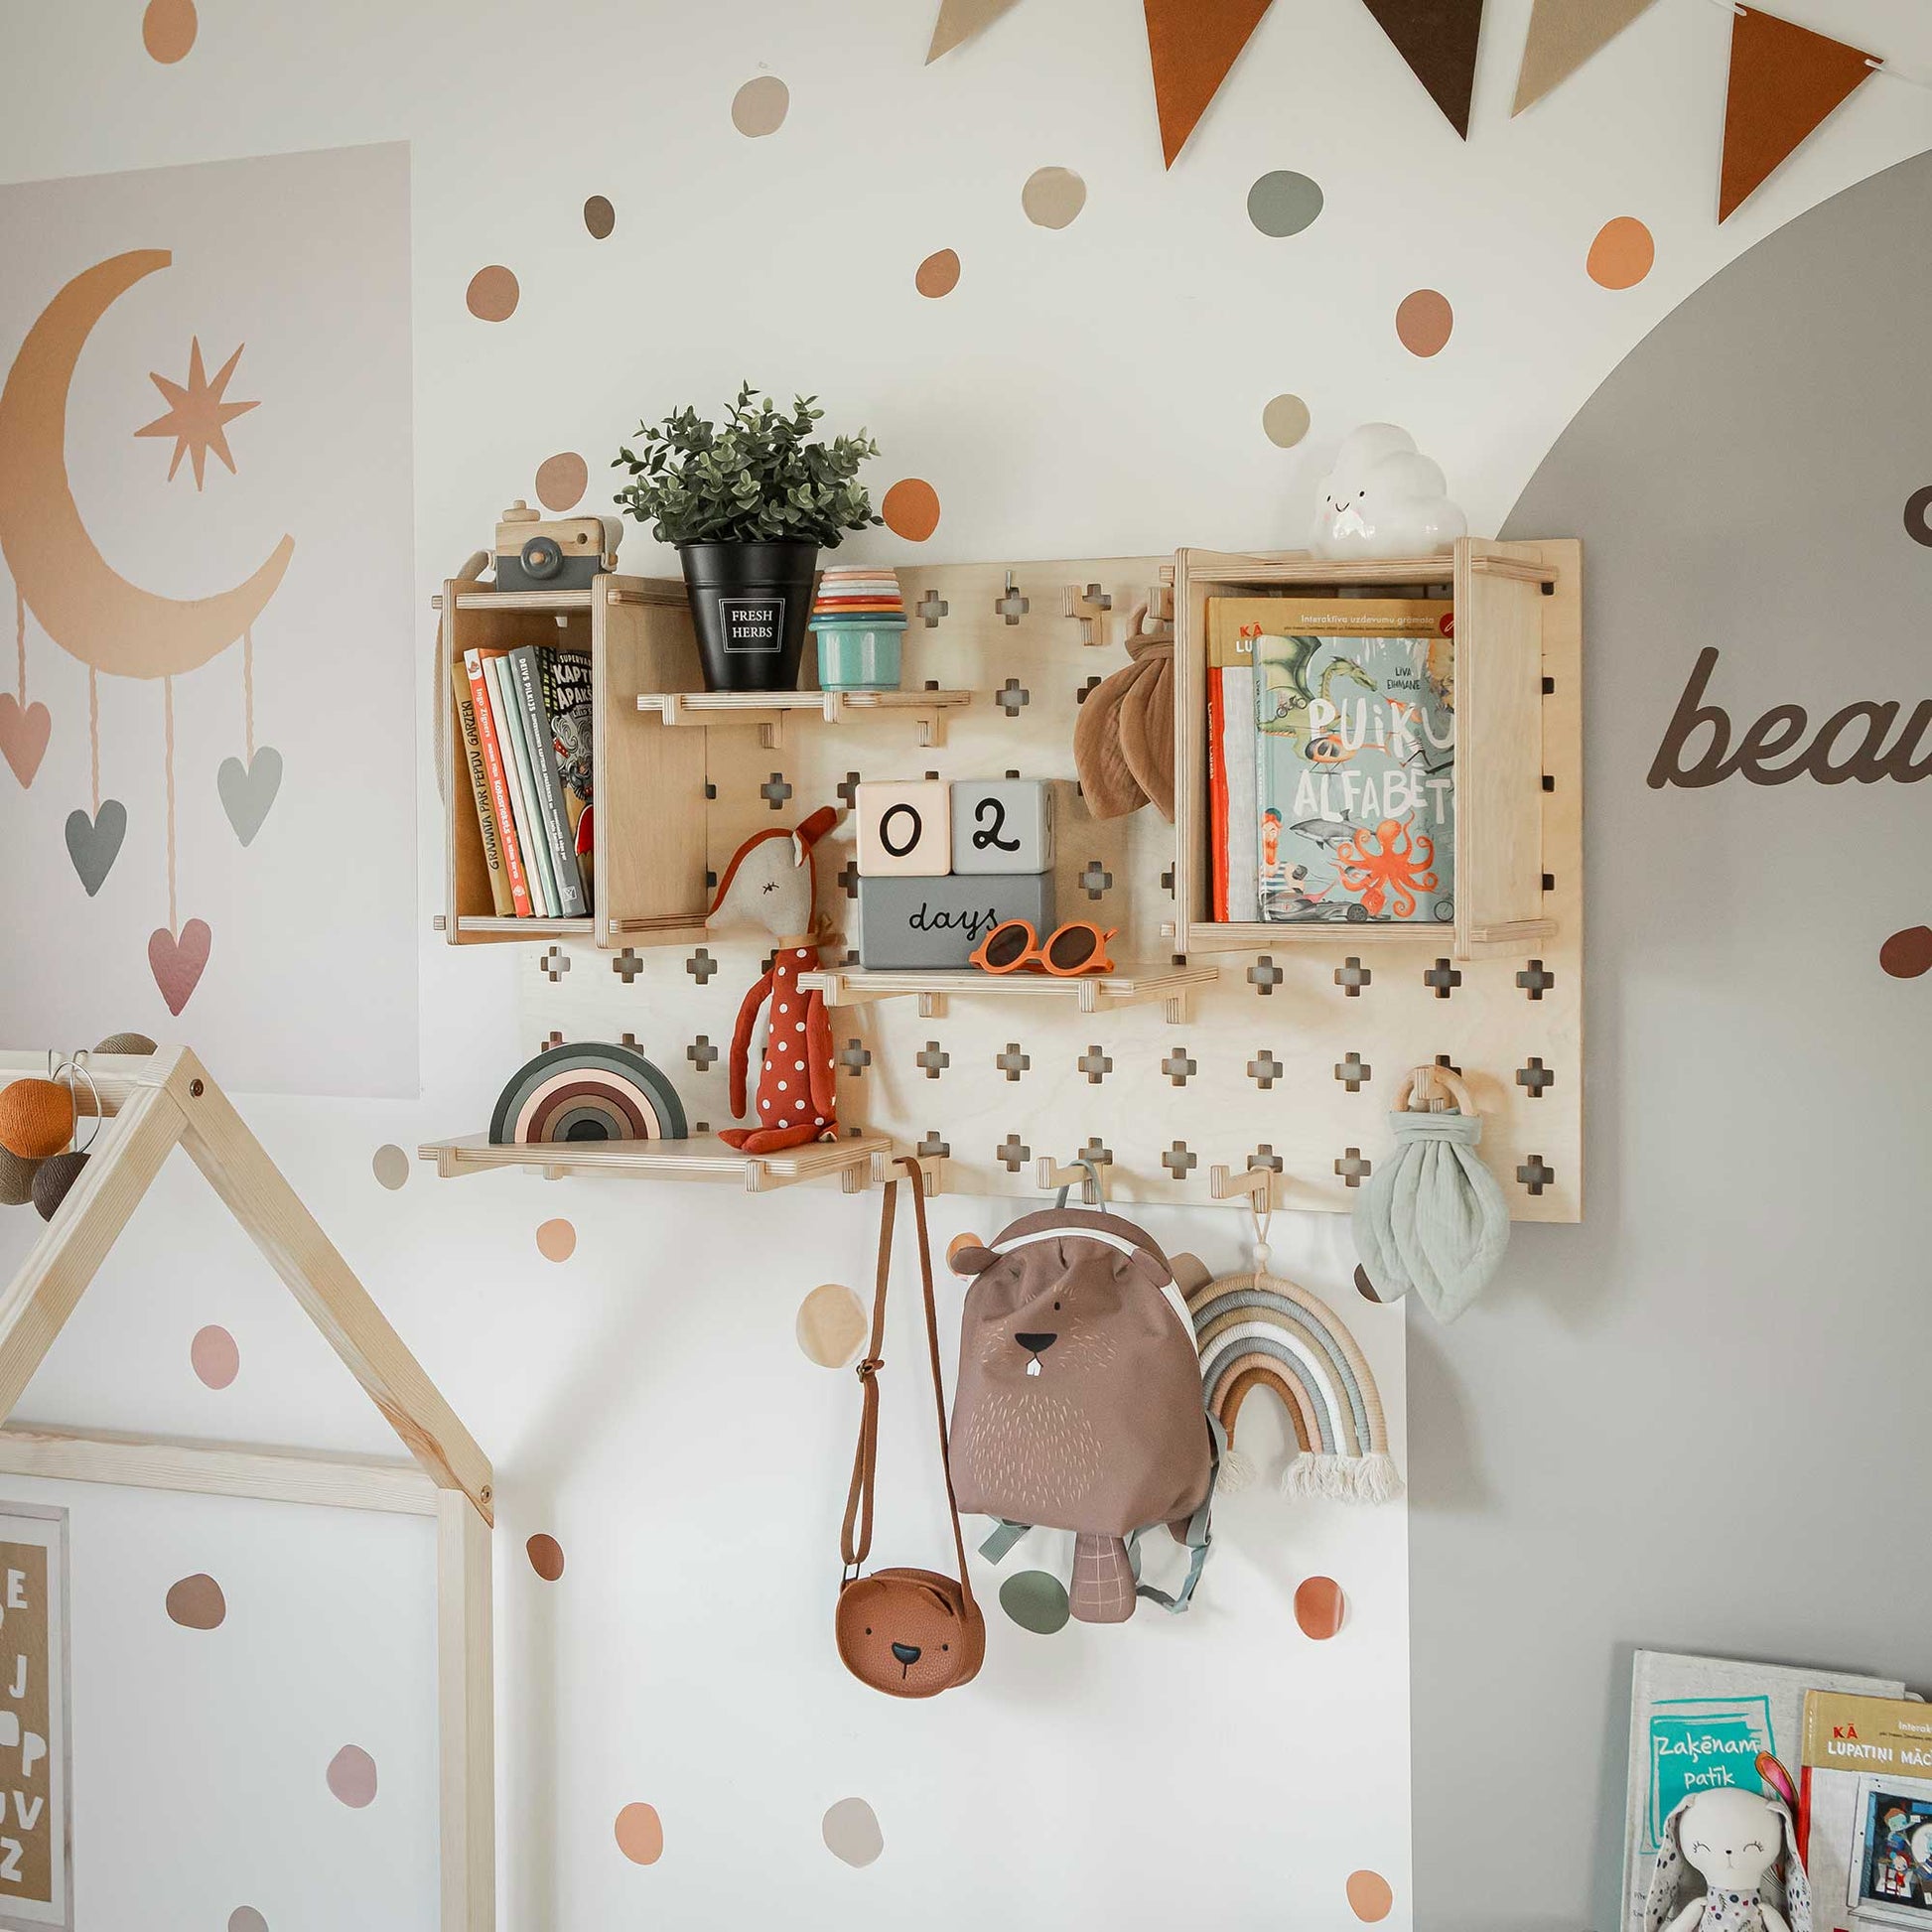 A children's room featuring wall-mounted shelves holding books and decor, a versatile Pegboard Wall Shelf with expandable options for organizing toys, a calendar showing "02 day," colorful buntings, polka dot wall stickers, and playful items like a hanging backpack and a stuffed toy.